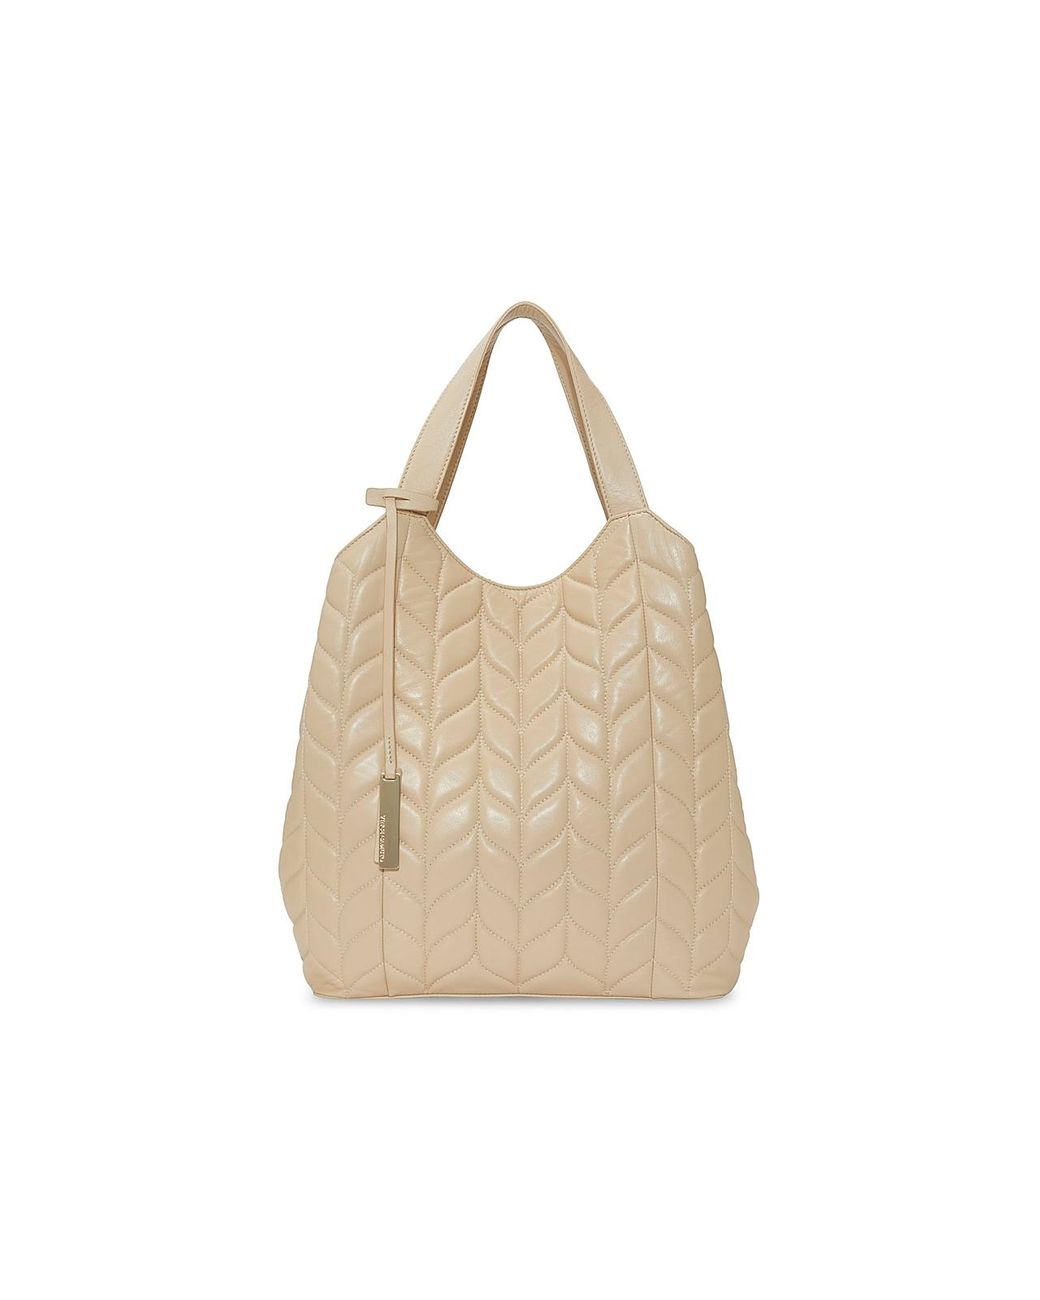 Vince Camuto Kisho Leather Tote in Natural | Lyst